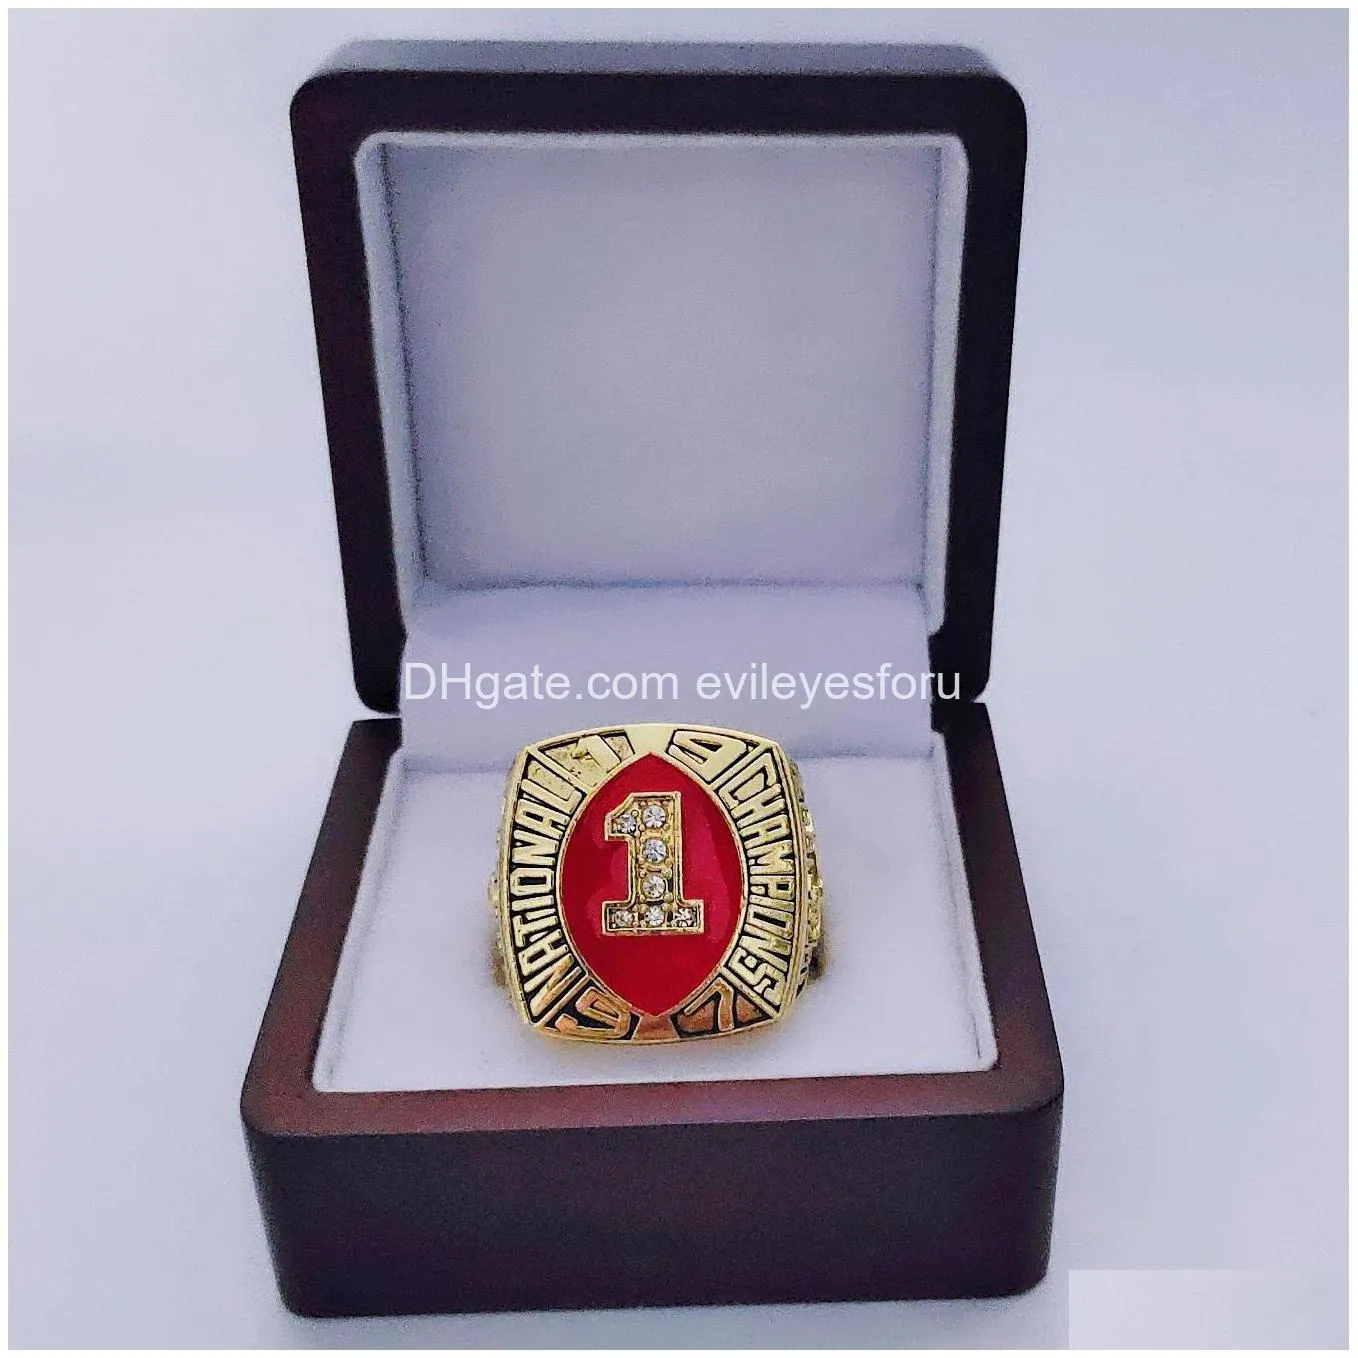 2020 wholesale 1994 championship ring fashion gifts from fans and friends leather bag parts accessories